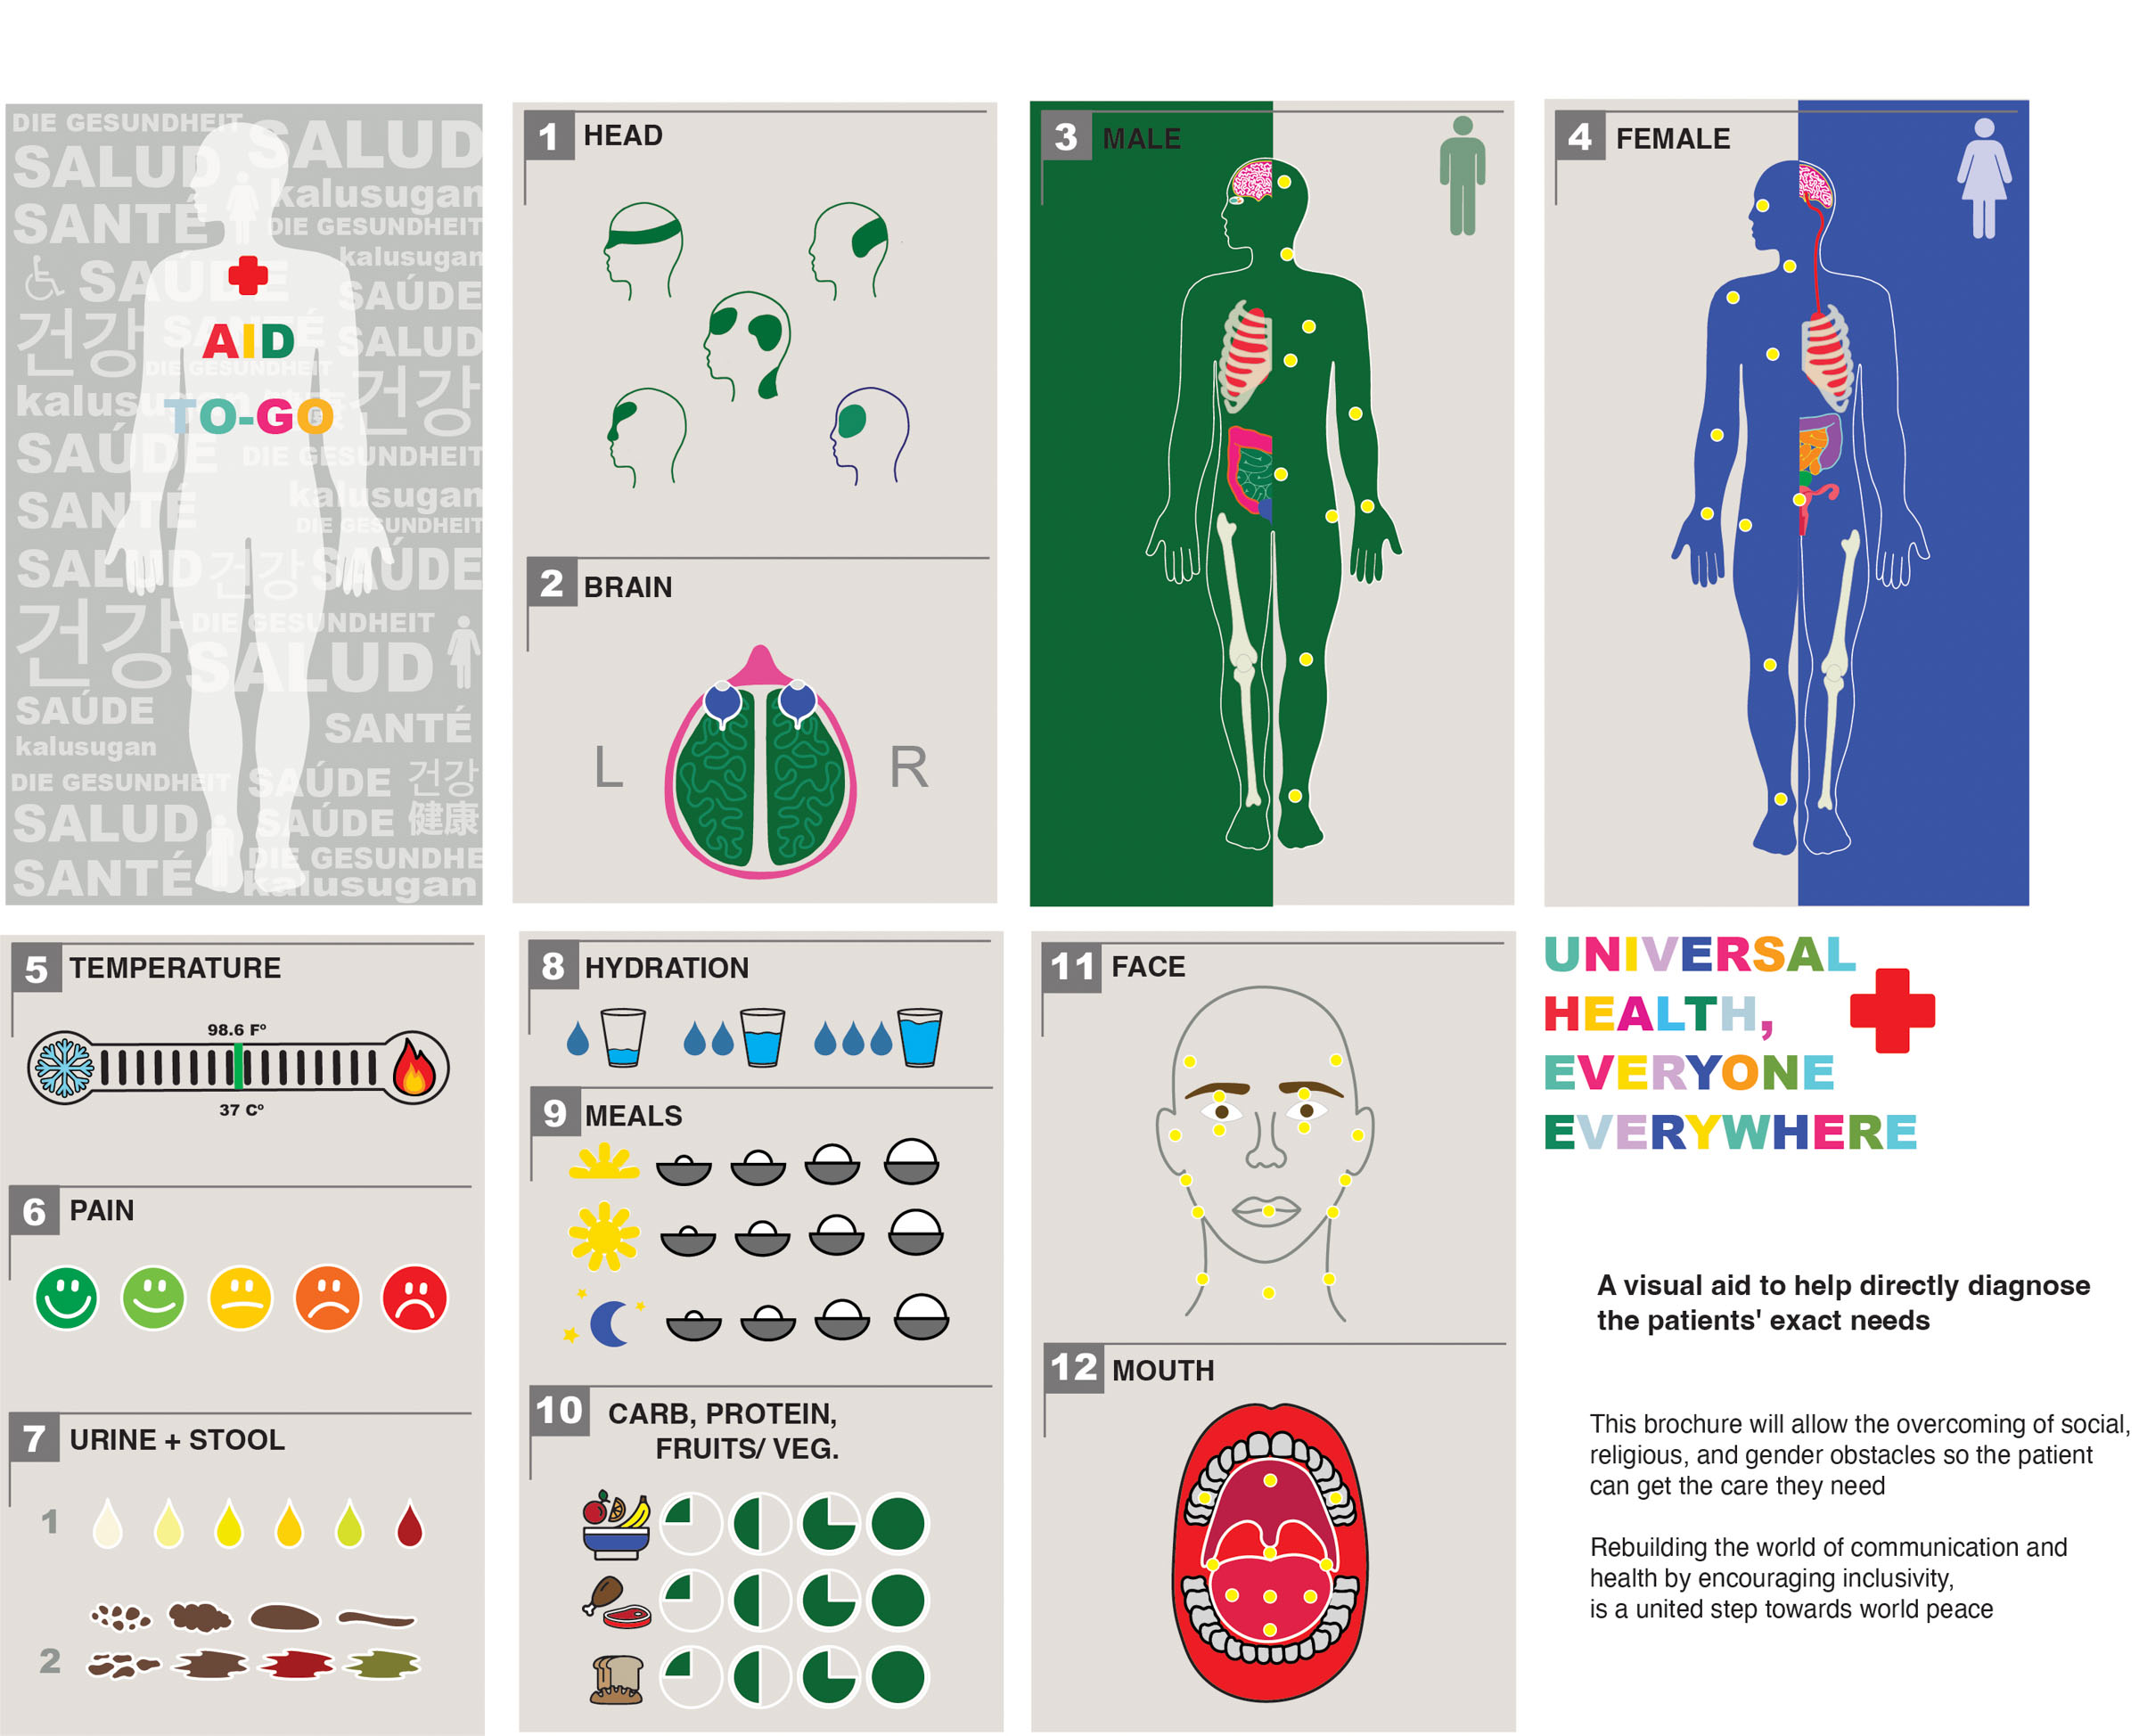 Eight posters featuring graphics depicting different areas of the human body as well as visual scales for different pieces of information like temperature, pain, and hydration.